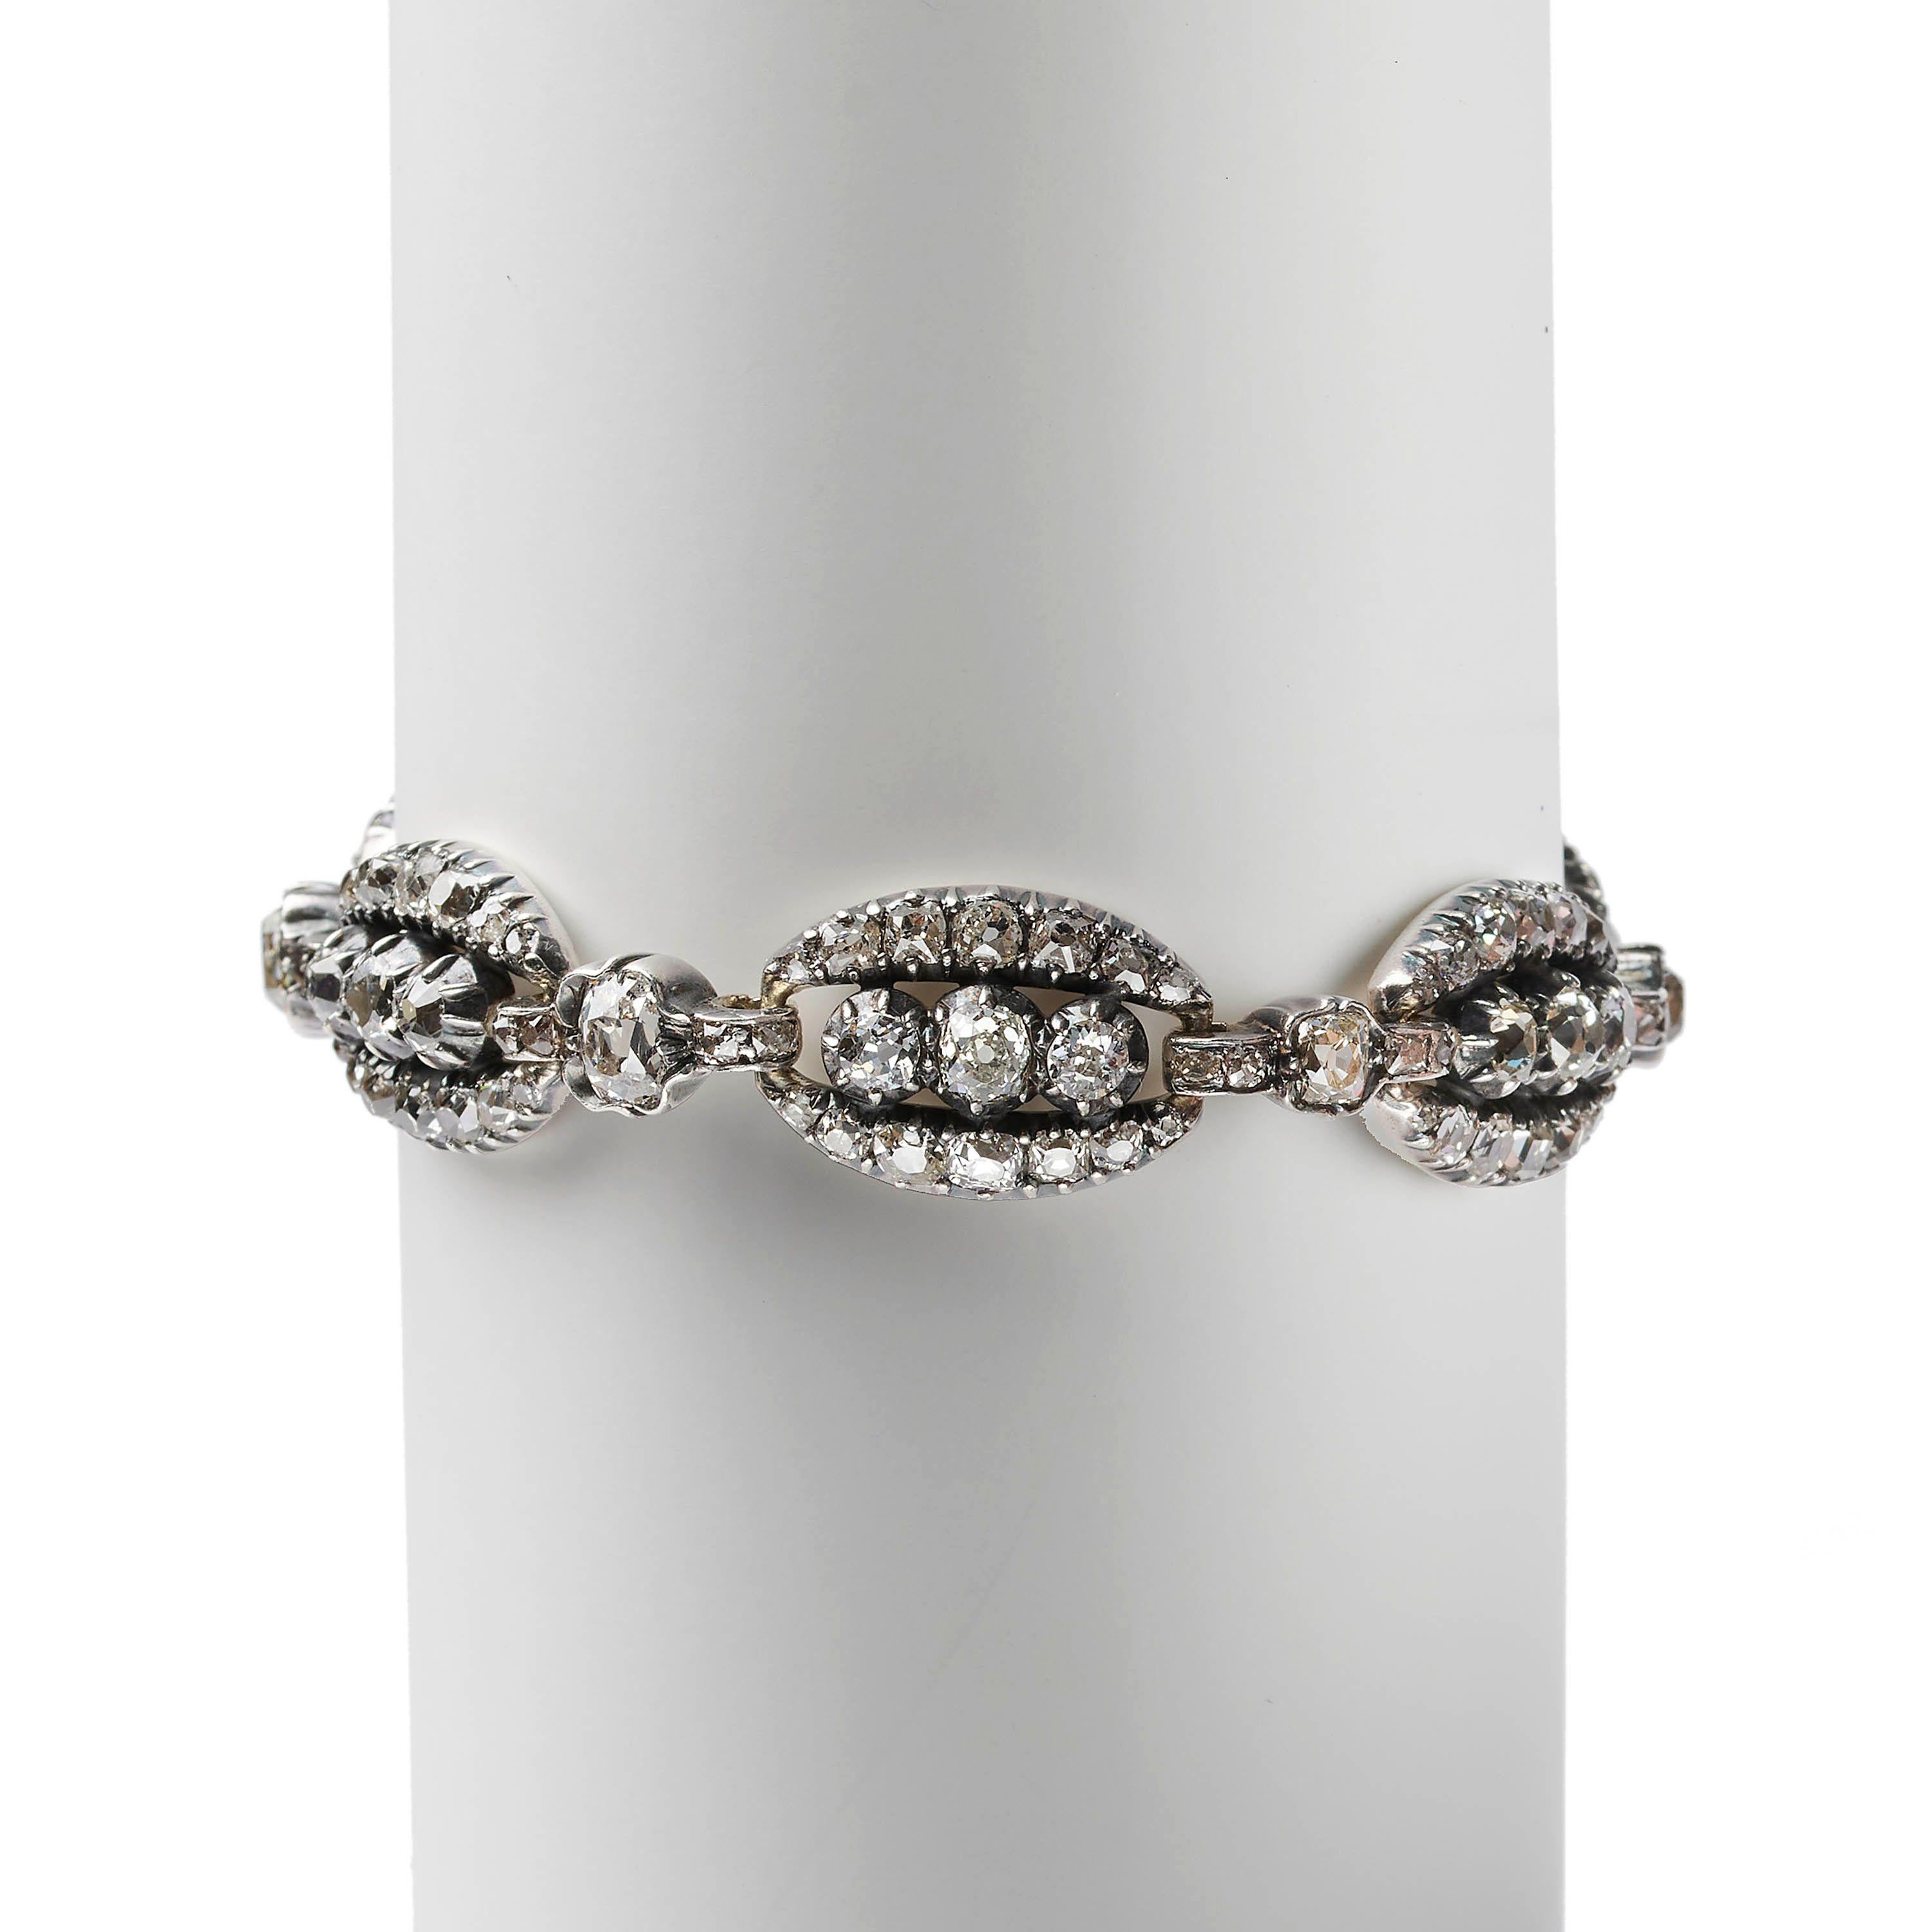 Victorian Diamond and Silver Upon Gold Bracelet, 10.50ct, Circa 1870 For Sale 1